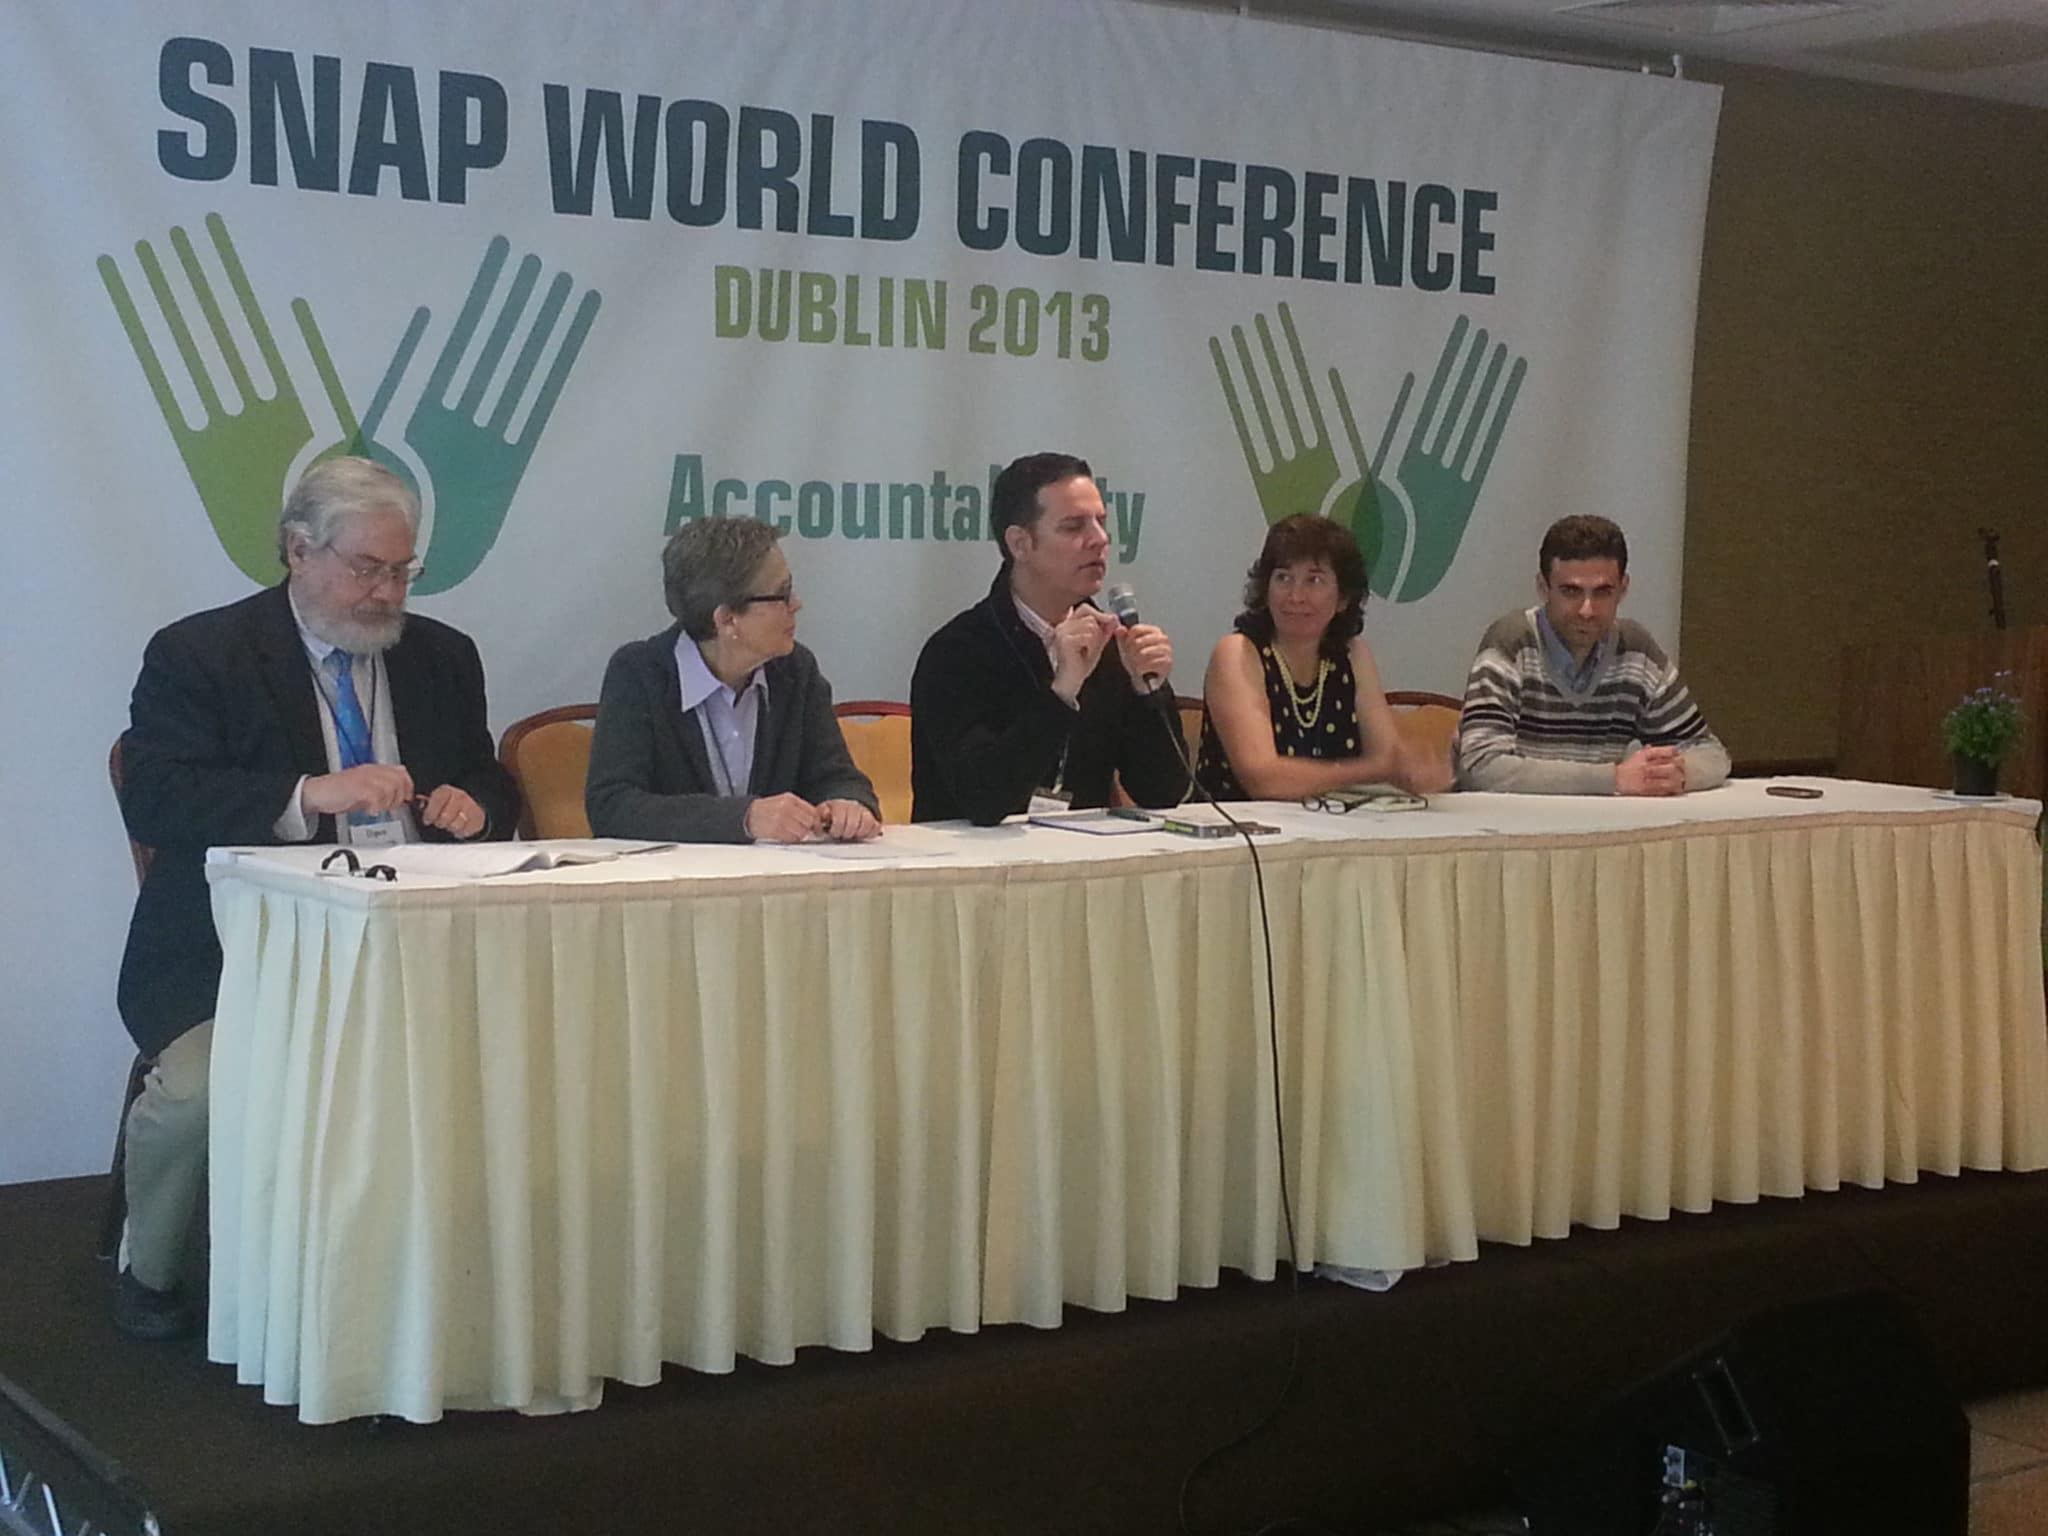 SNAP world conference in Dublin